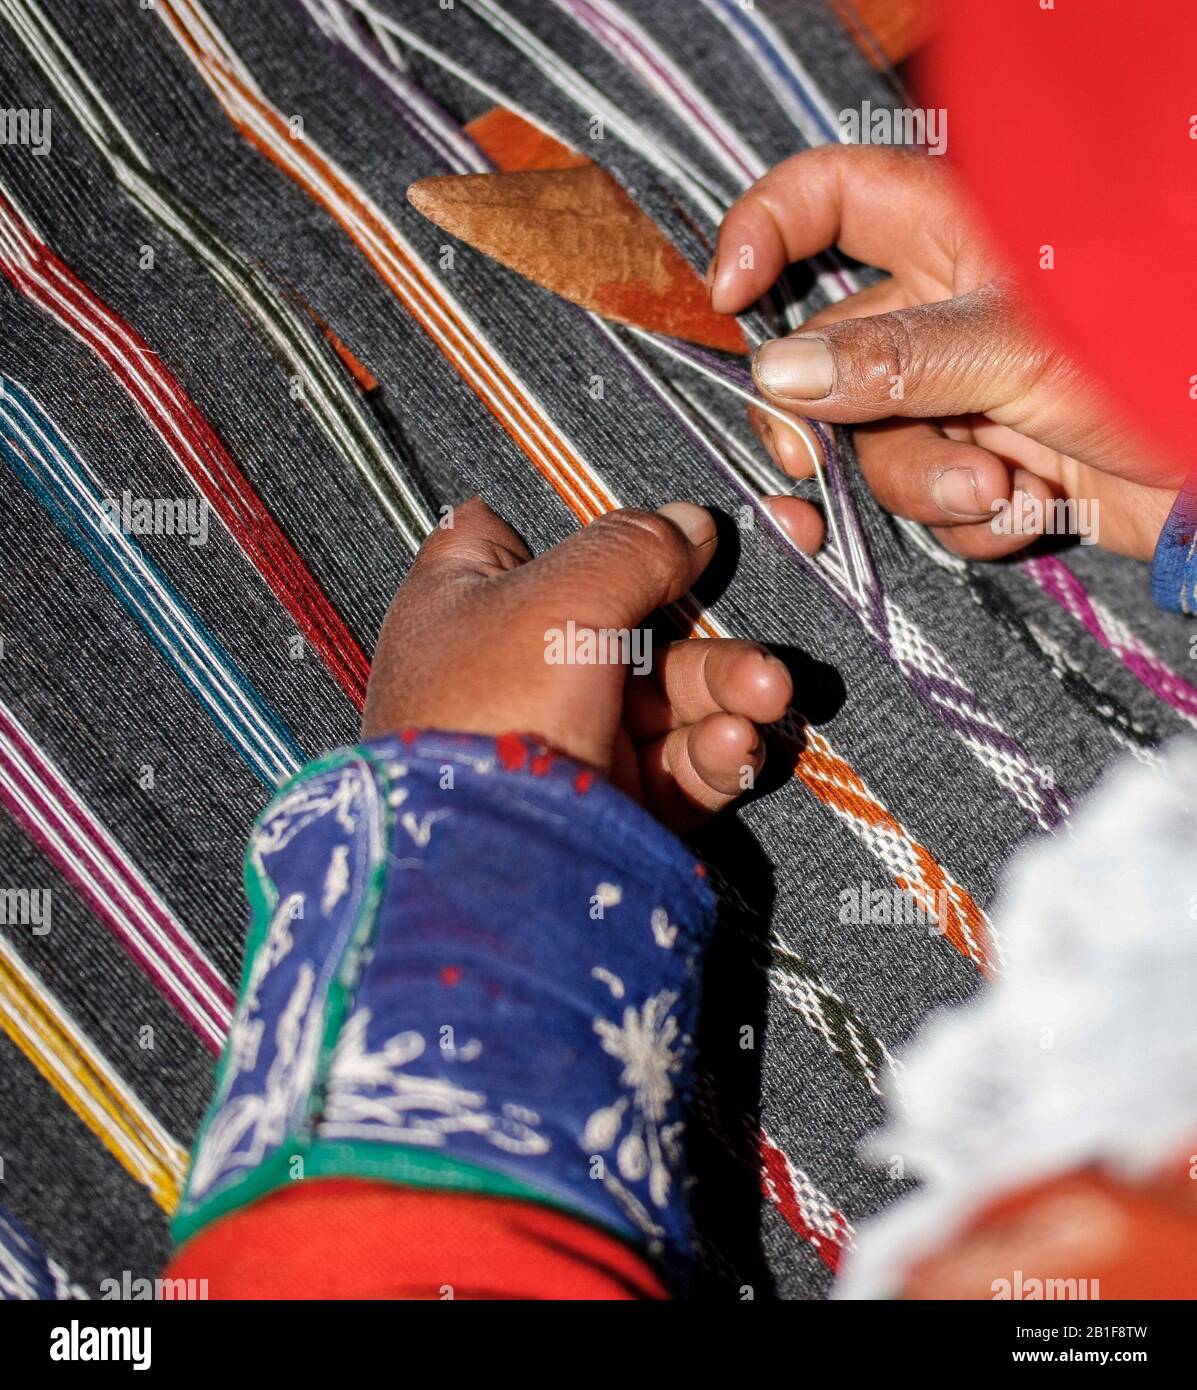 Traditional weaving with alpaca and llama wool by local woman from Ccaccaccollo in the Sacred Valley, Peru. Stock Photo